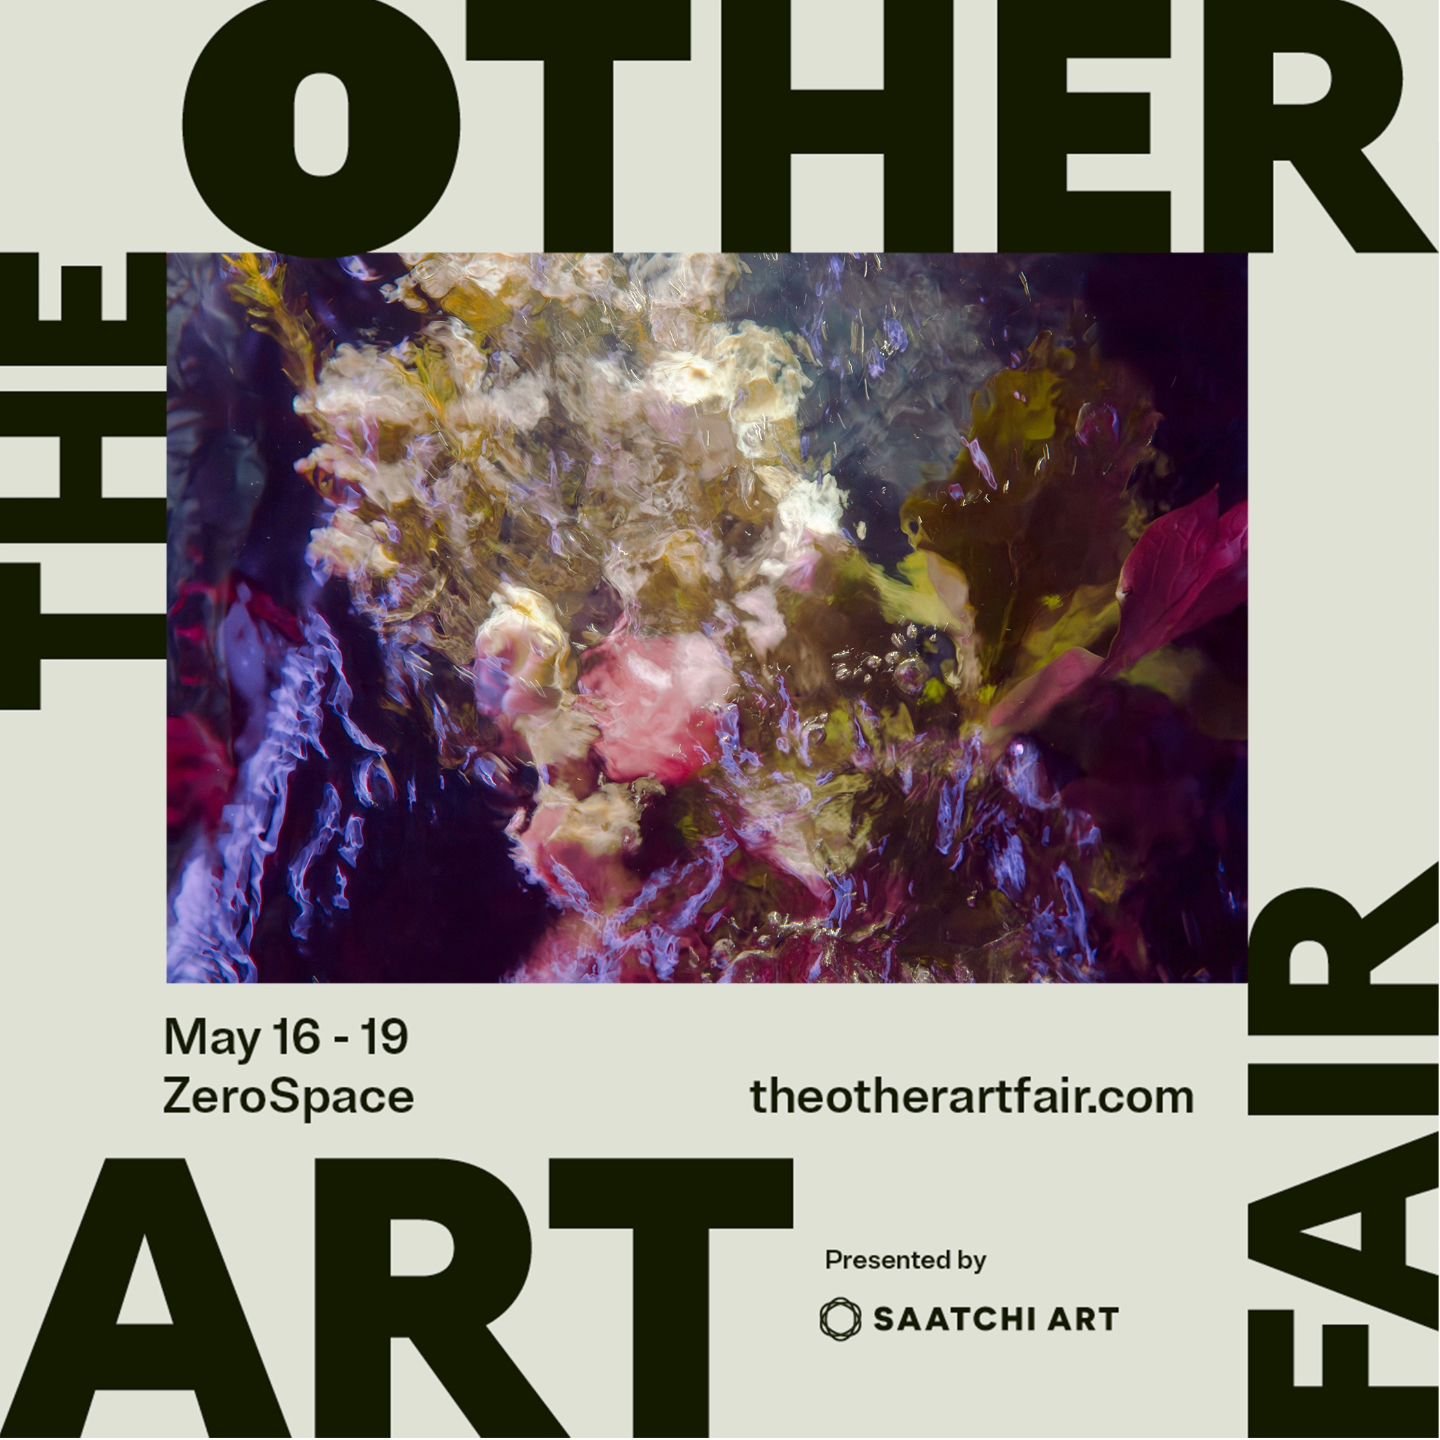 I'm thrilled to announce that I'll be participating in @theotherartfair in Brooklyn next month! 🎉 This marks my very first exhibition outside the EU, and I'm both excited and a bit nervous about presenting my art on another continent. 🌍✨

My latest